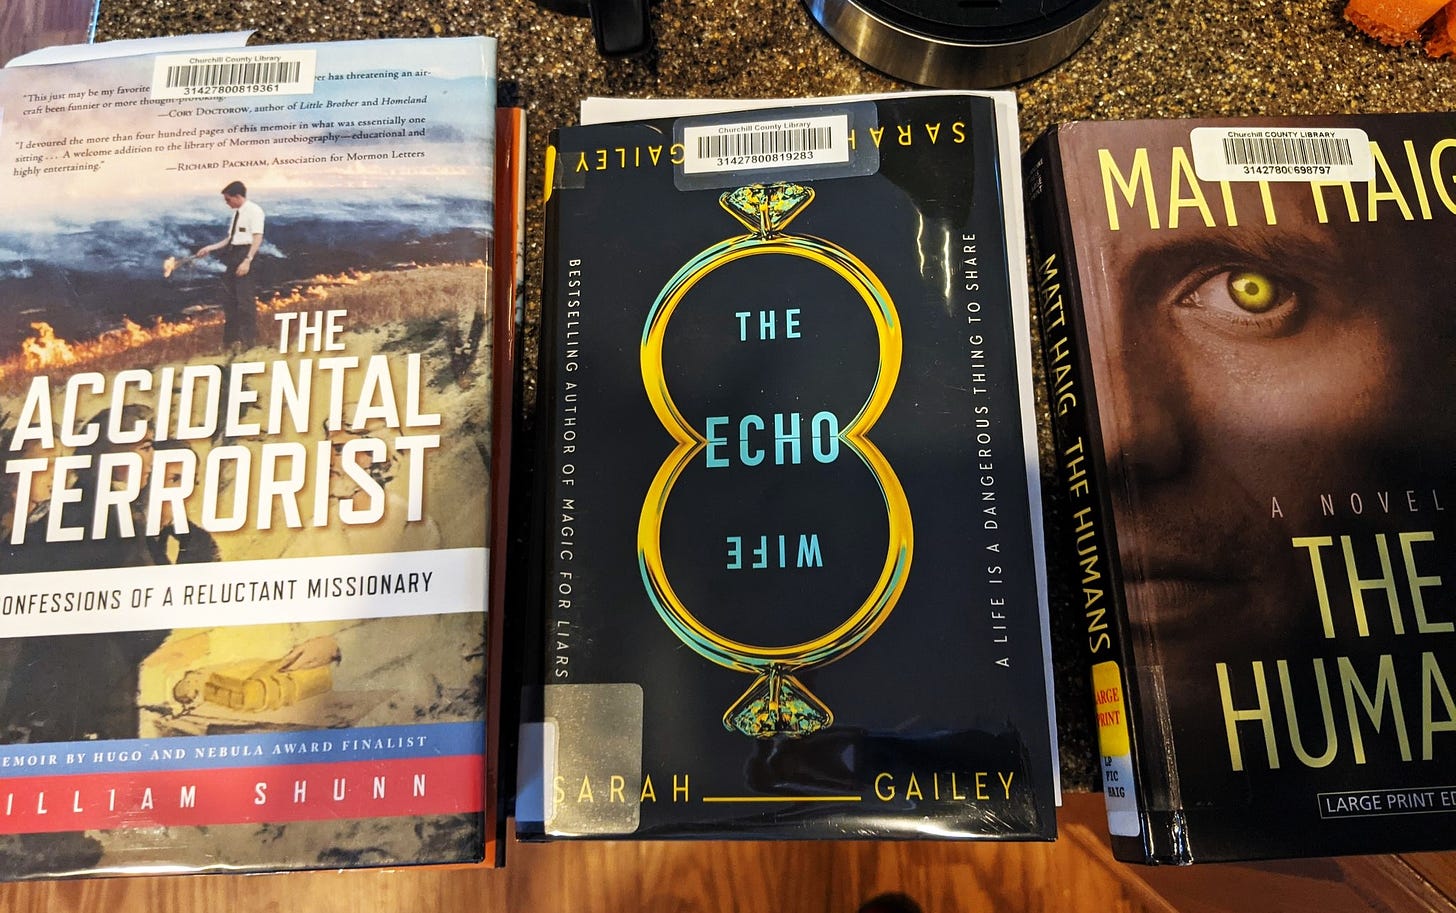 Three books (The Accidental Terrorist by William Shunn, The Echo Wife by Sarah Gailey, The Humans by Matt Haig) sit face-up side by side on a counter, all featuring bar codes from the Churchill Country Library in Nevada.